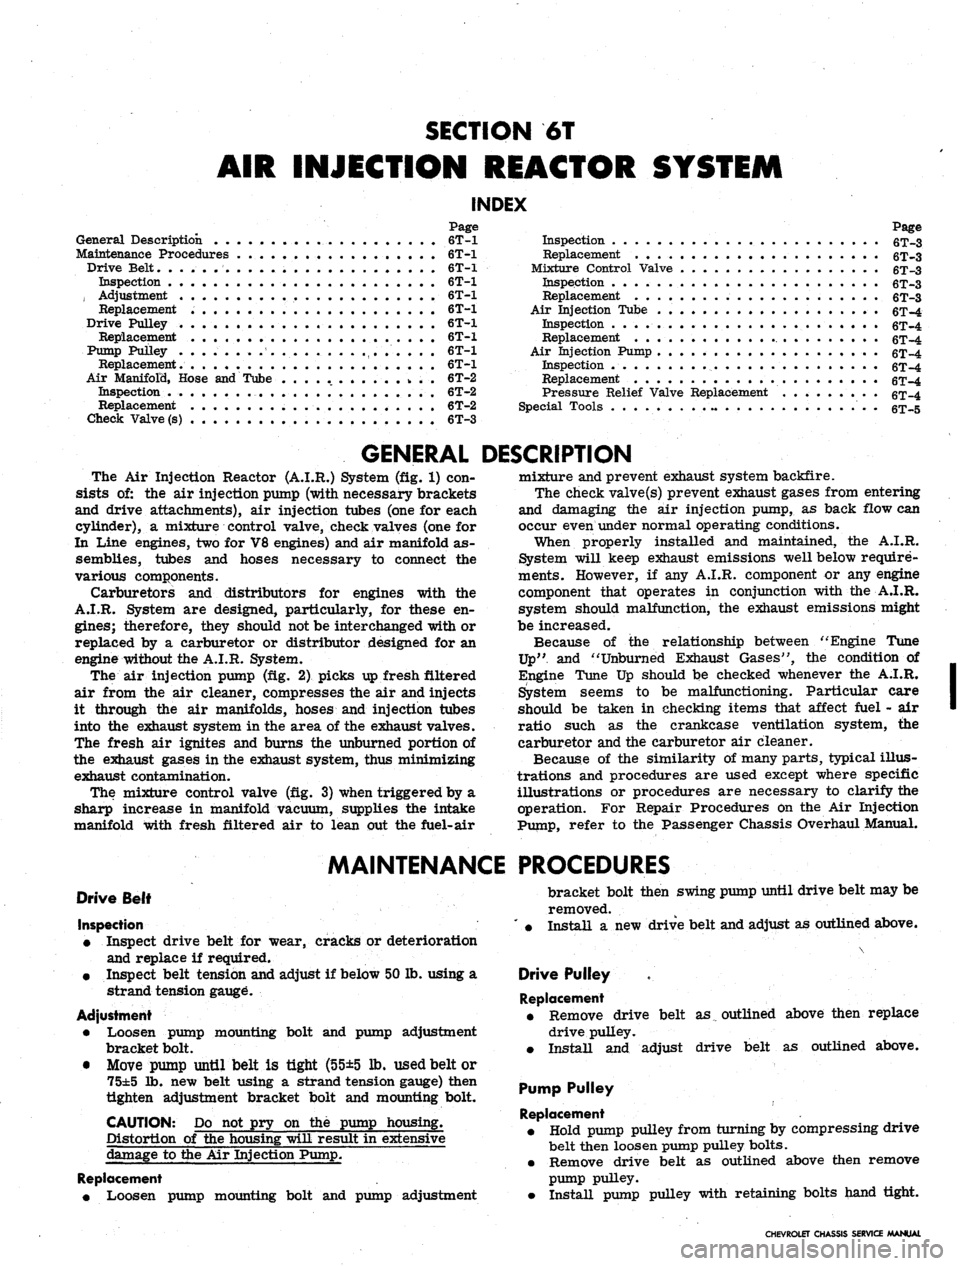 CHEVROLET CAMARO 1967 1.G Chassis Workshop Manual 
SECTION 6T

AIR INJECTION REACTOR SYSTEM

INDEX

Page

General Description 6T-1

Maintenance Procedures 6T>1

Drive Belt. ...-.. 6T-1

Inspection 6T-1

, Adjustment . . 6T-1

Replacement 6T-1

Drive